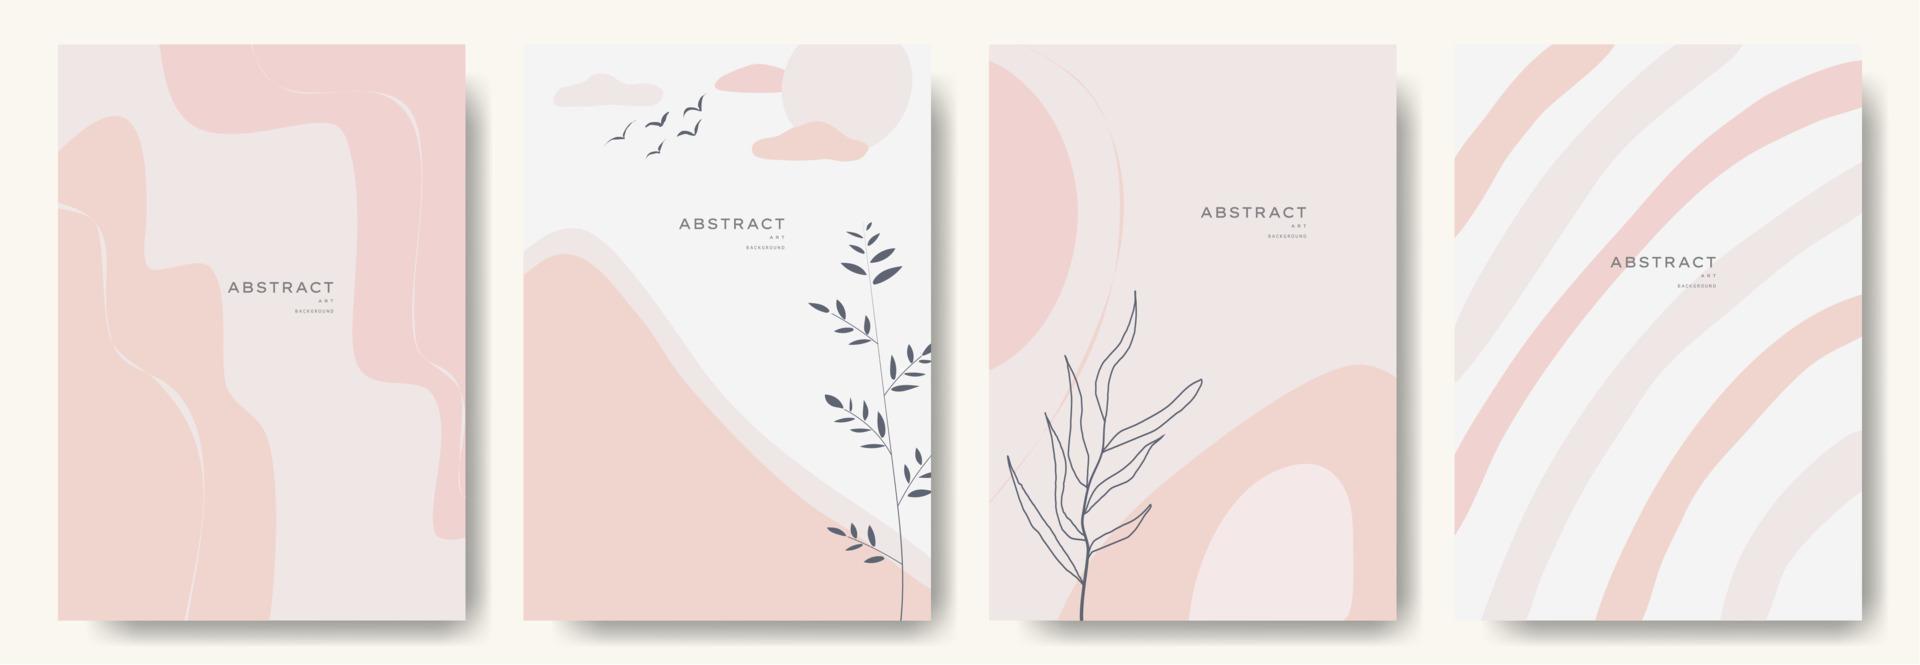 Modern abstract backgrounds.minimal trendy style. various shapes set up design templates good for background  card greeting wallpaper brochure flier invitation and other. vector illustration